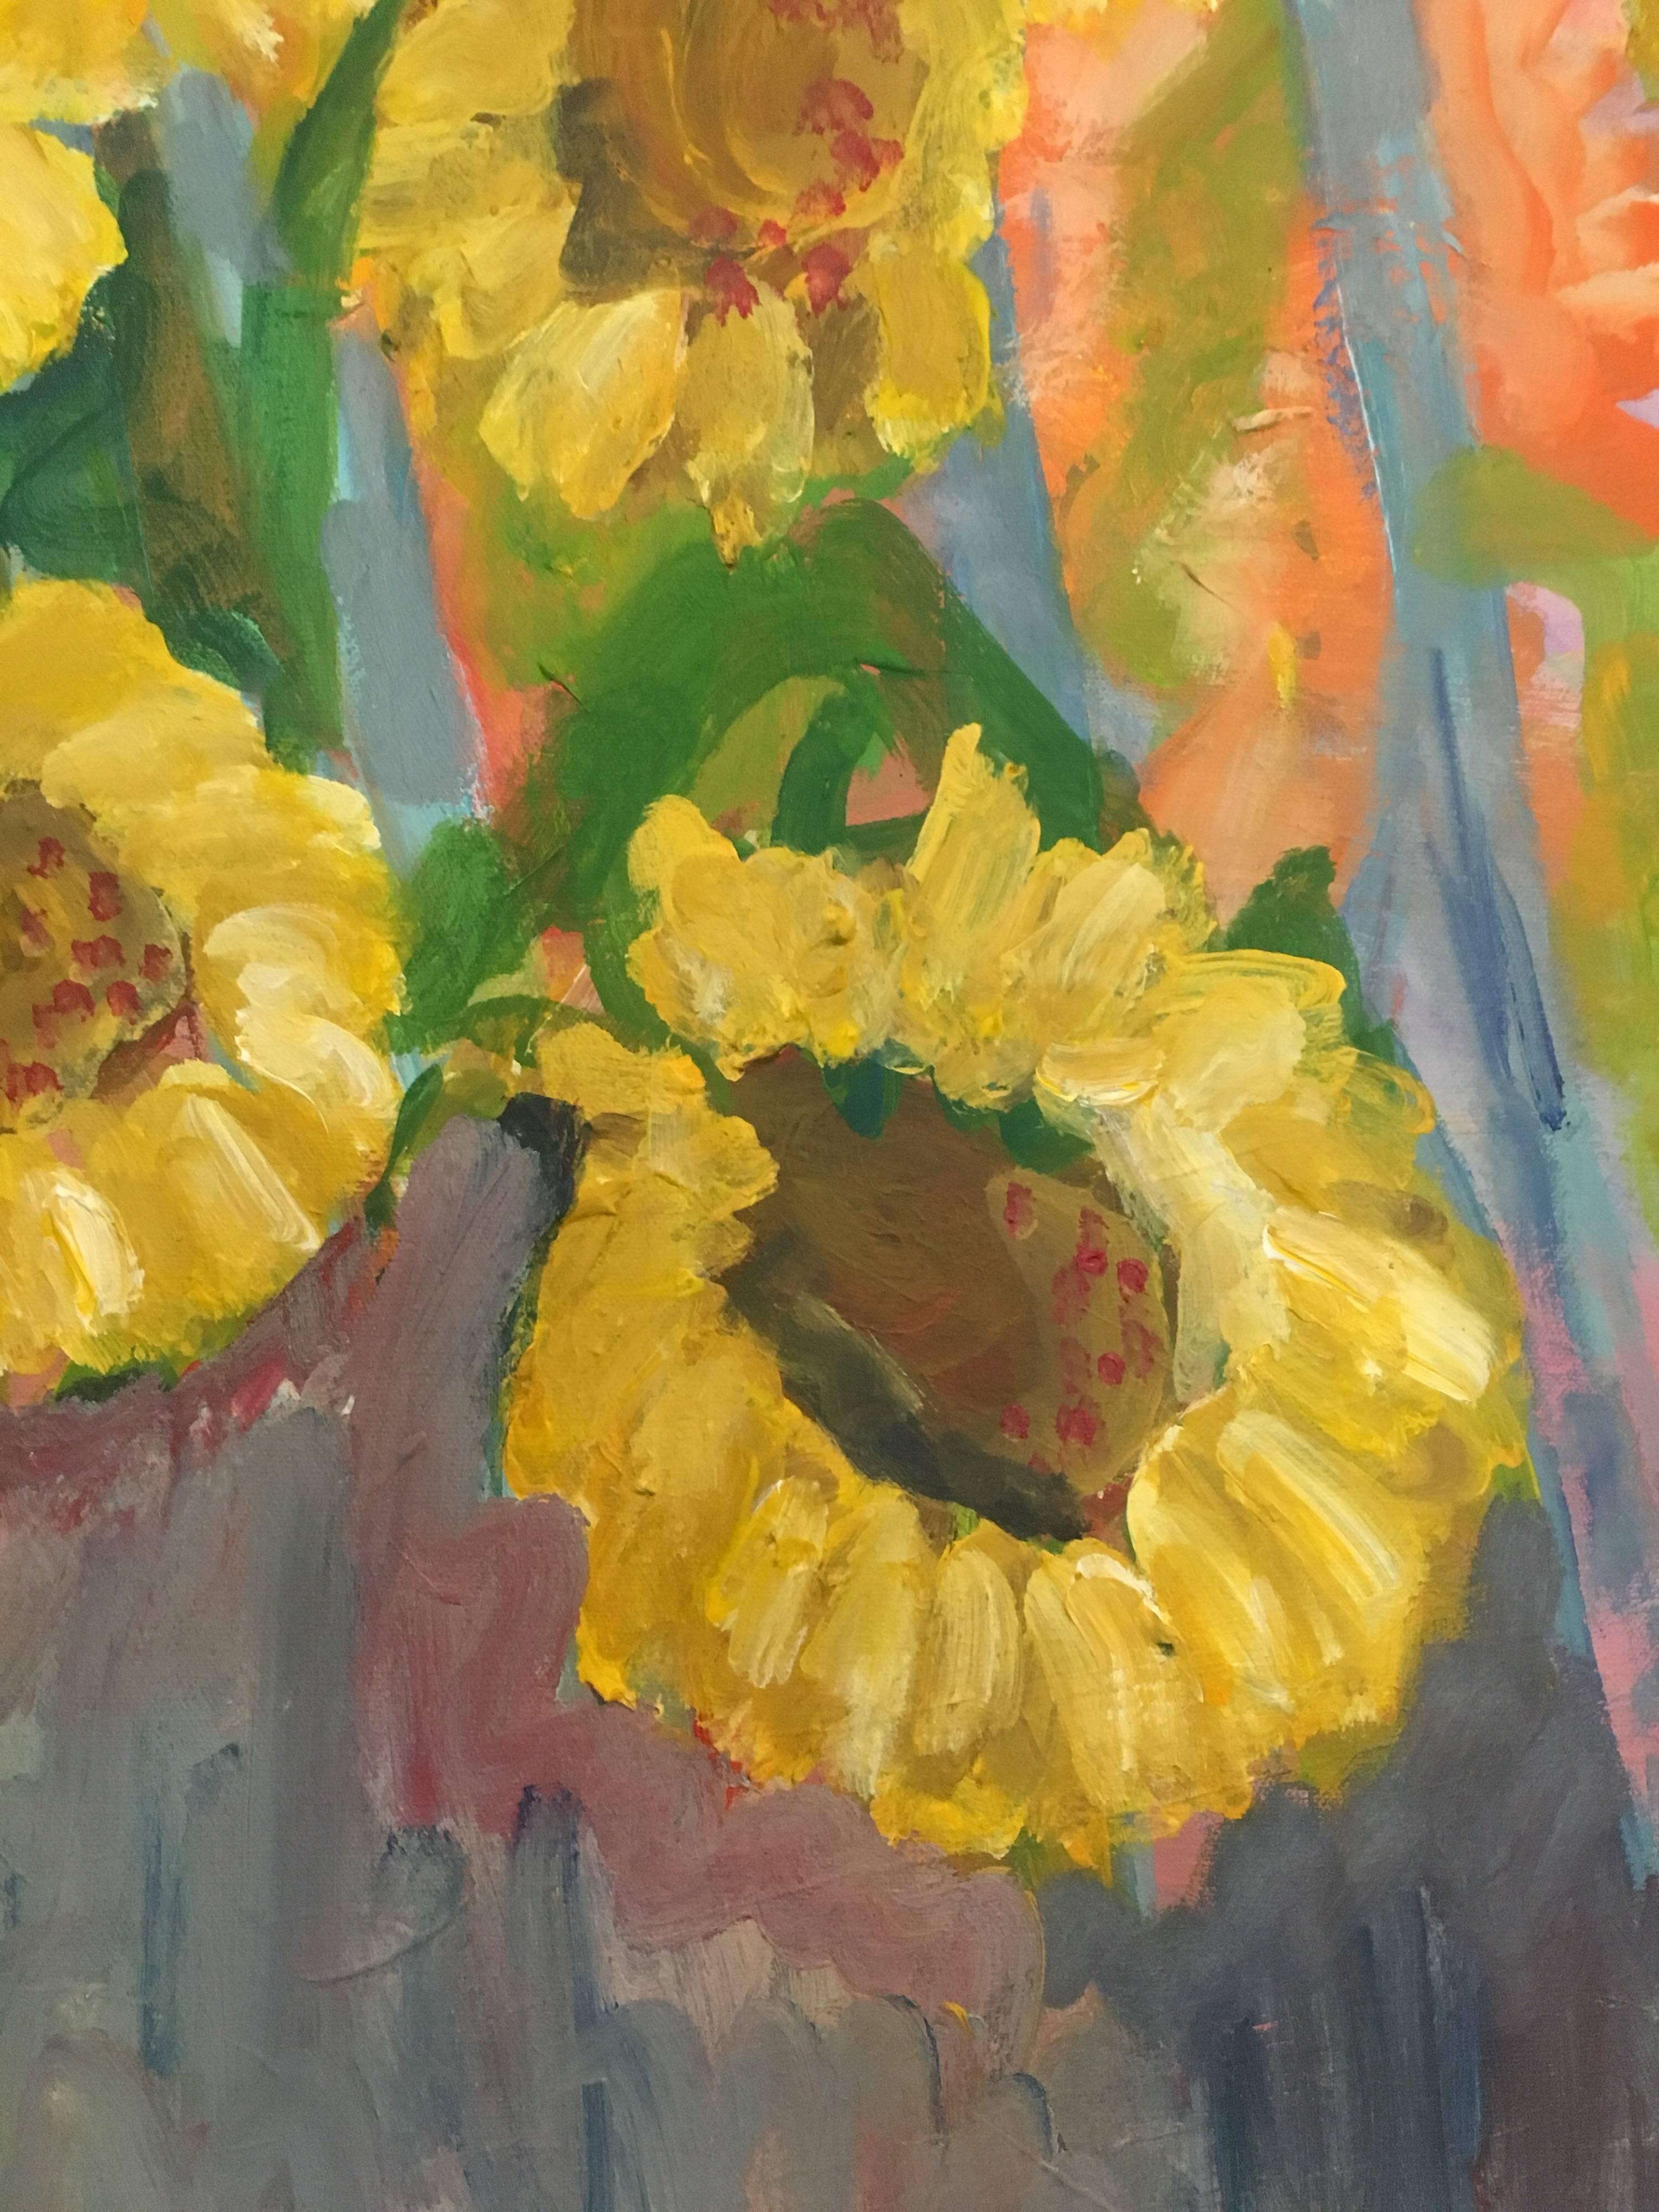 Sunflowers, Still Life Oil Painting, British Artist
by Pamela Cawley, British 20th century
oil painting on canvas, unframed

canvas: 20 x 24 inches 

Stunning original Impressionist oil painting by the 20th century British artist, Pamela Cawley. The